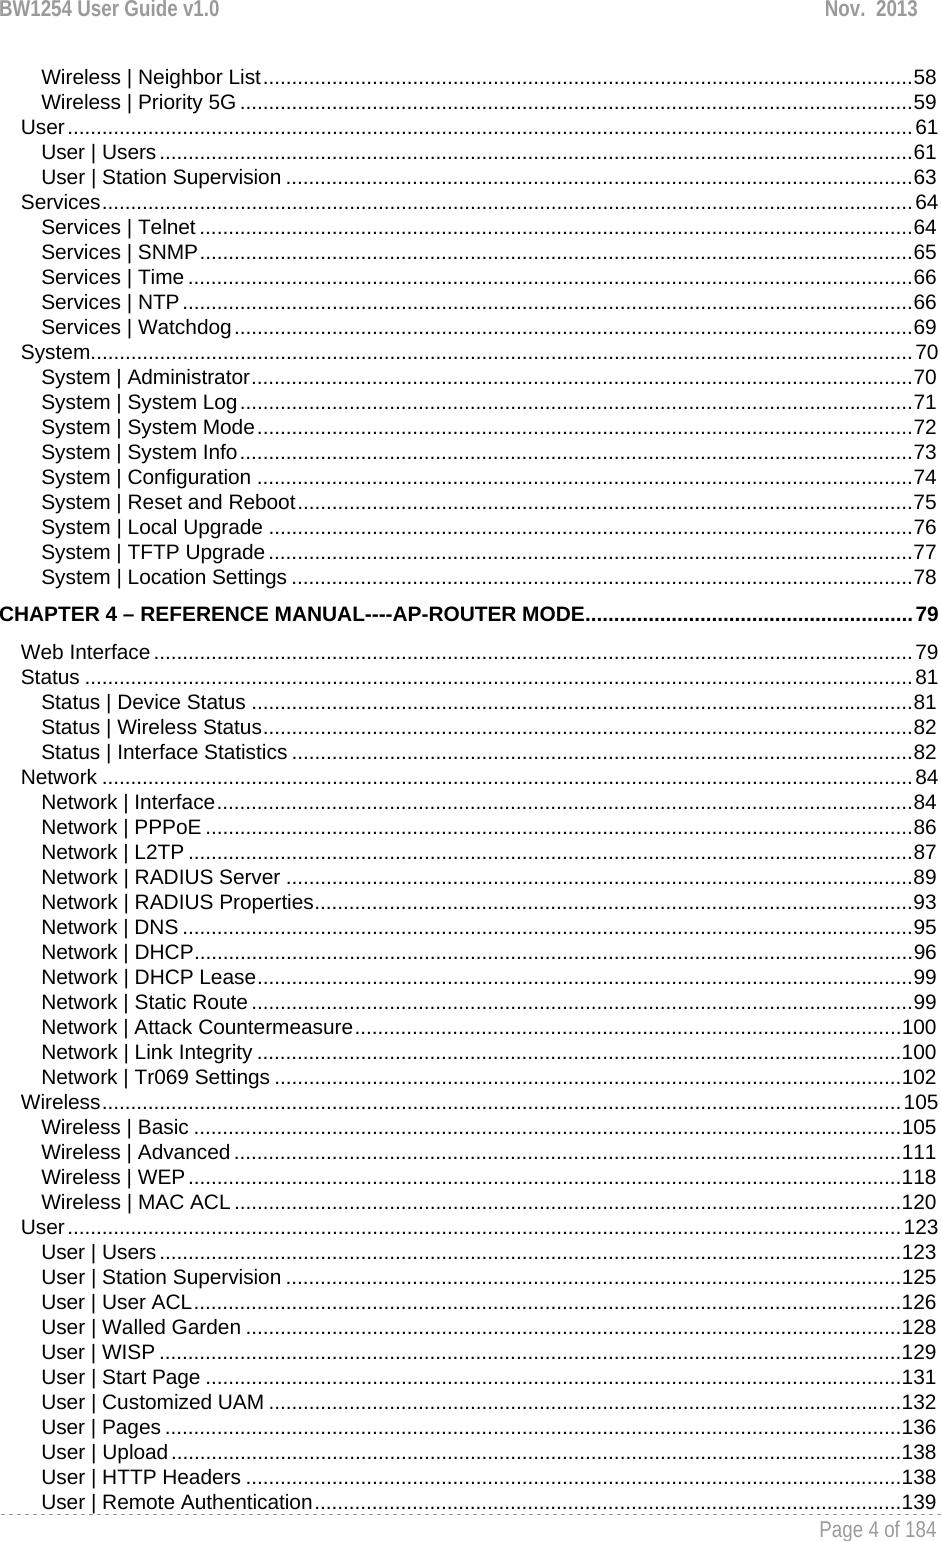 BW1254 User Guide v1.0  Nov.  2013     Page 4 of 184   Wireless | Neighbor List ................................................................................................................. 58Wireless | Priority 5G ..................................................................................................................... 59User ................................................................................................................................................... 61User | Users ................................................................................................................................... 61User | Station Supervision ............................................................................................................. 63Services ............................................................................................................................................. 64Services | Telnet ............................................................................................................................ 64Services | SNMP ............................................................................................................................ 65Services | Time .............................................................................................................................. 66Services | NTP ............................................................................................................................... 66Services | Watchdog ...................................................................................................................... 69System ............................................................................................................................................... 70System | Administrator ................................................................................................................... 70System | System Log ..................................................................................................................... 71System | System Mode .................................................................................................................. 72System | System Info ..................................................................................................................... 73System | Configuration .................................................................................................................. 74System | Reset and Reboot ........................................................................................................... 75System | Local Upgrade ................................................................................................................ 76System | TFTP Upgrade ................................................................................................................ 77System | Location Settings ............................................................................................................ 78CHAPTER 4 – REFERENCE MANUAL----AP-ROUTER MODE ......................................................... 79Web Interface .................................................................................................................................... 79Status ................................................................................................................................................ 81Status | Device Status ................................................................................................................... 81Status | Wireless Status ................................................................................................................. 82Status | Interface Statistics ............................................................................................................ 82Network ............................................................................................................................................. 84Network | Interface ......................................................................................................................... 84Network | PPPoE ........................................................................................................................... 86Network | L2TP .............................................................................................................................. 87Network | RADIUS Server ............................................................................................................. 89Network | RADIUS Properties ........................................................................................................ 93Network | DNS ............................................................................................................................... 95Network | DHCP ............................................................................................................................. 96Network | DHCP Lease .................................................................................................................. 99Network | Static Route ................................................................................................................... 99Network | Attack Countermeasure ............................................................................................... 100Network | Link Integrity ................................................................................................................ 100Network | Tr069 Settings ............................................................................................................. 102Wireless ........................................................................................................................................... 105Wireless | Basic ........................................................................................................................... 105Wireless | Advanced .................................................................................................................... 111Wireless | WEP ............................................................................................................................ 118Wireless | MAC ACL .................................................................................................................... 120User ................................................................................................................................................. 123User | Users ................................................................................................................................. 123User | Station Supervision ........................................................................................................... 125User | User ACL ........................................................................................................................... 126User | Walled Garden .................................................................................................................. 128User | WISP ................................................................................................................................. 129User | Start Page ......................................................................................................................... 131User | Customized UAM .............................................................................................................. 132User | Pages ................................................................................................................................ 136User | Upload ............................................................................................................................... 138User | HTTP Headers .................................................................................................................. 138User | Remote Authentication ...................................................................................................... 139